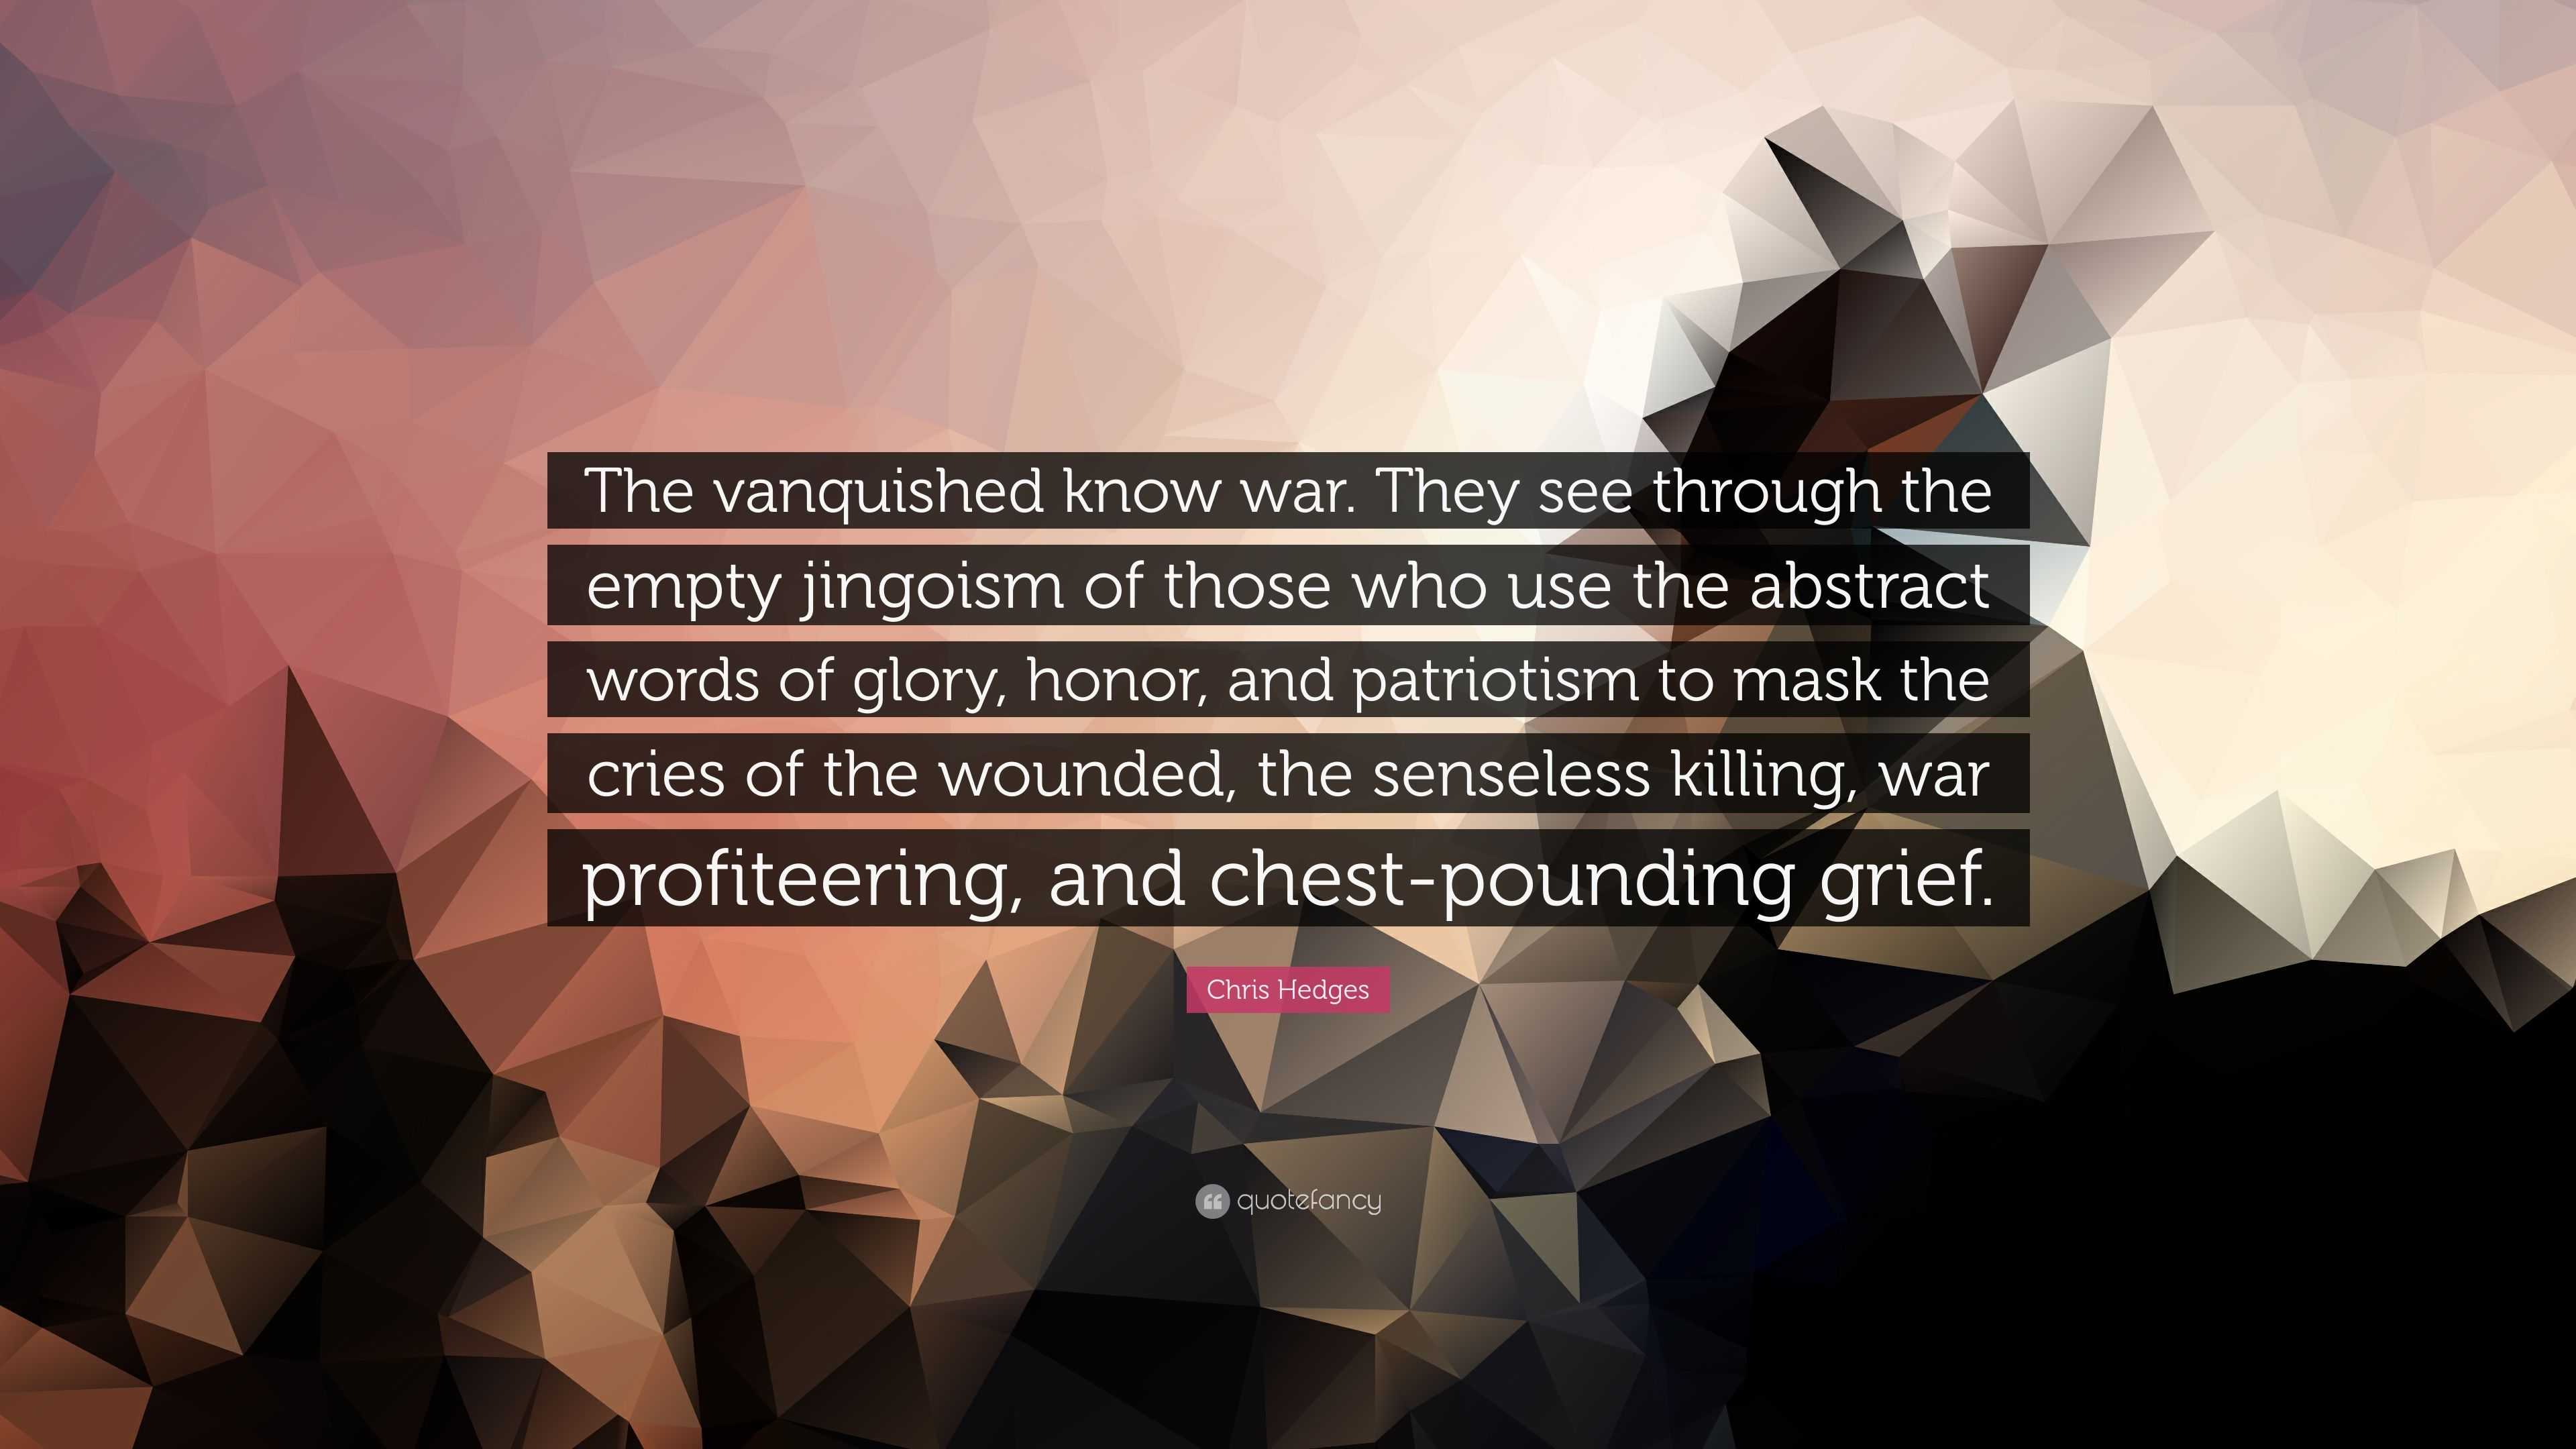 What Every Person Should Know About War by Chris Hedges